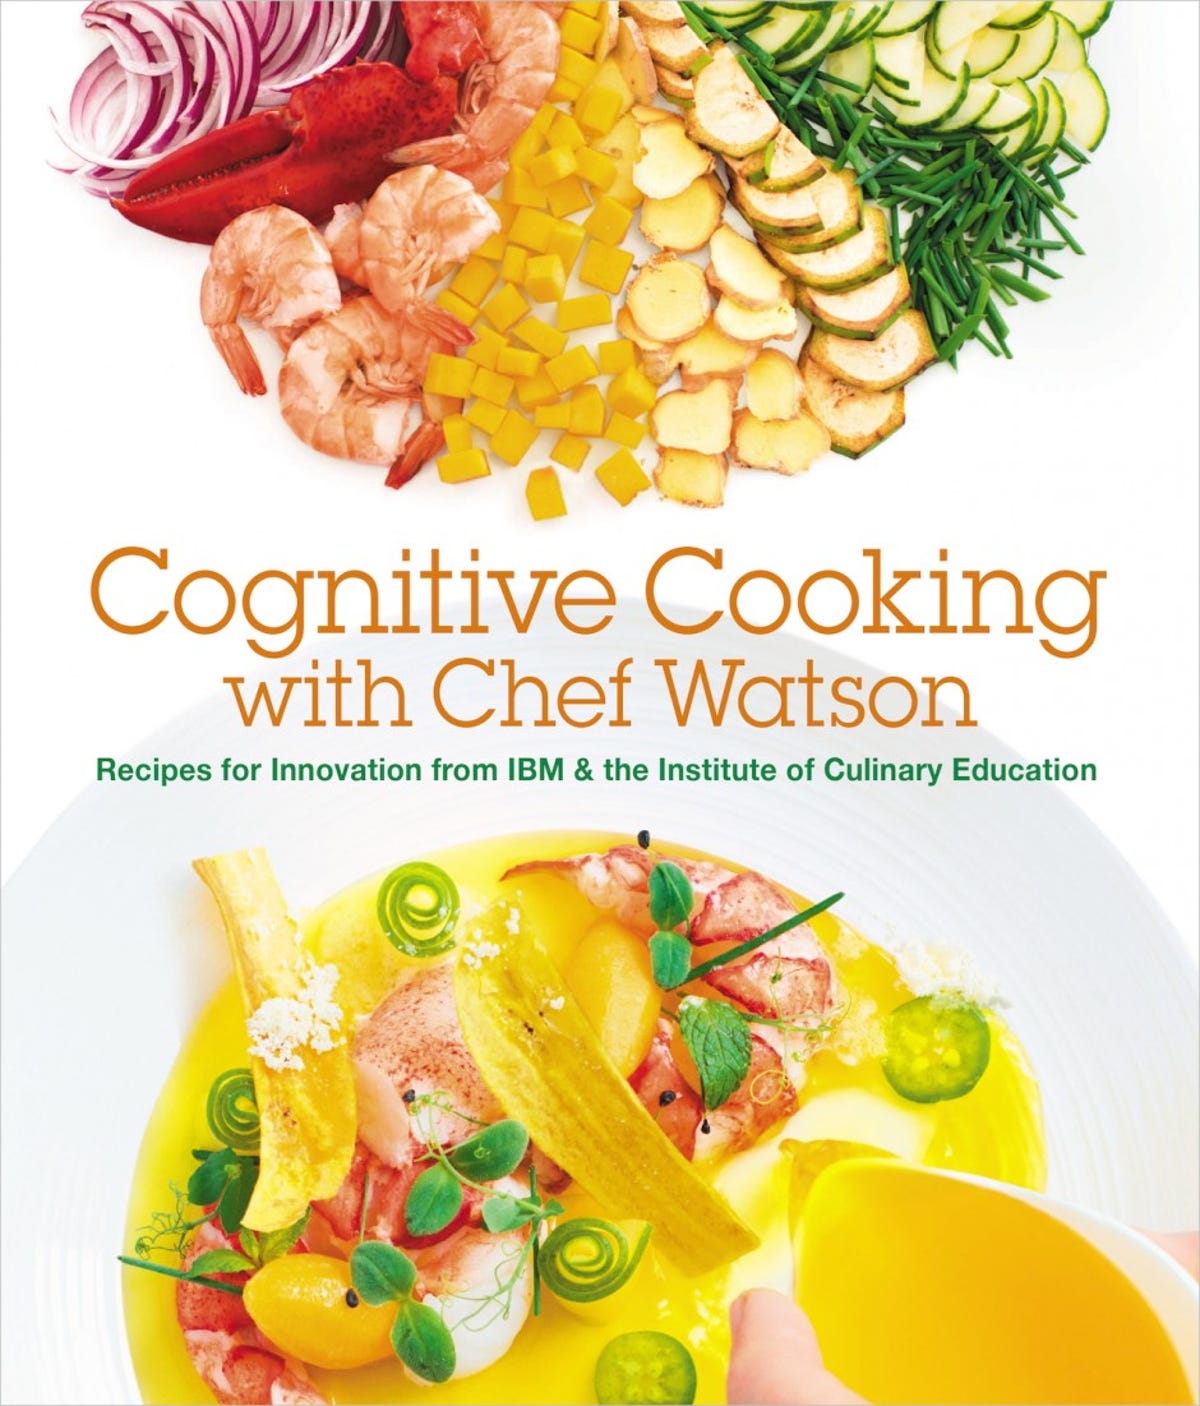 Chef Watson's "Cognitive Cooking"